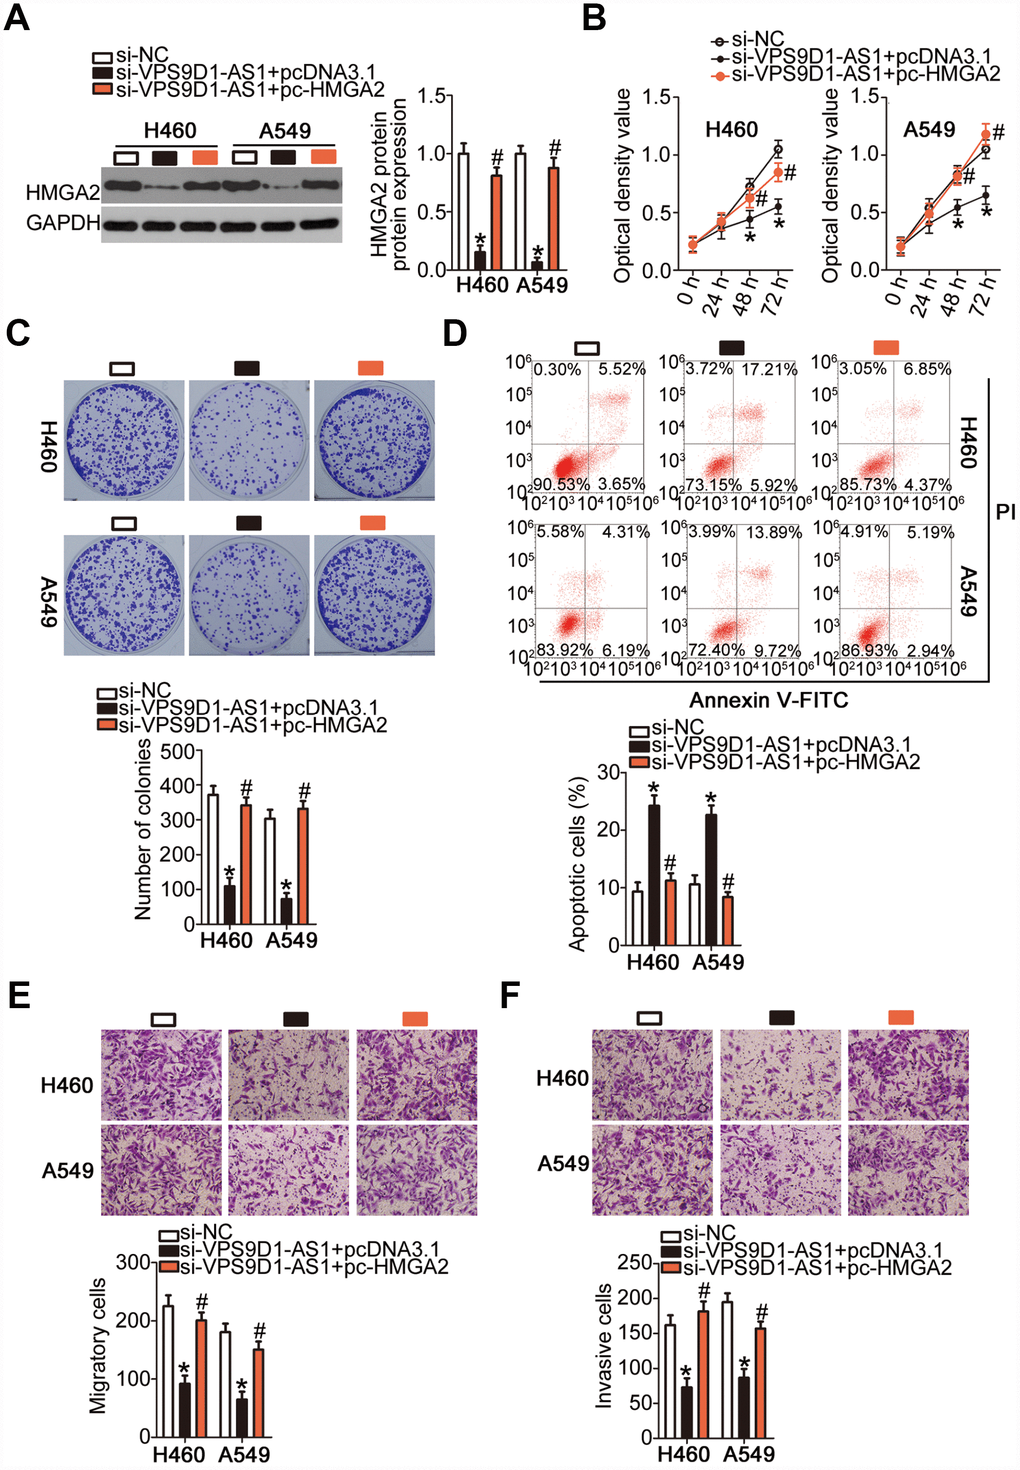 Recovery of HMGA2 expression reverses inhibitory actions of si-VPS9D1-AS1 on NSCLC cells. (A) Quantification of HMGA2 protein expression in H460 and A549 cells transfected with plasmid pc-HMGA2 or the empty pcDNA3.1 vector along with si-VPS9D1-AS1 by western blot. *P #P si-VPS9D1-AS1 + pcDNA3.1 group. (B–F) Cell proliferation, colony formation, apoptosis, migration, and invasiveness parameters of H460 and A549 cells, treated as described above, determined by the CCK-8 assay, the colony formation assay, flow cytometry, and Transwell migration and invasiveness assays, respectively. *P #P si-VPS9D1-AS1 + pcDNA3.1 group.